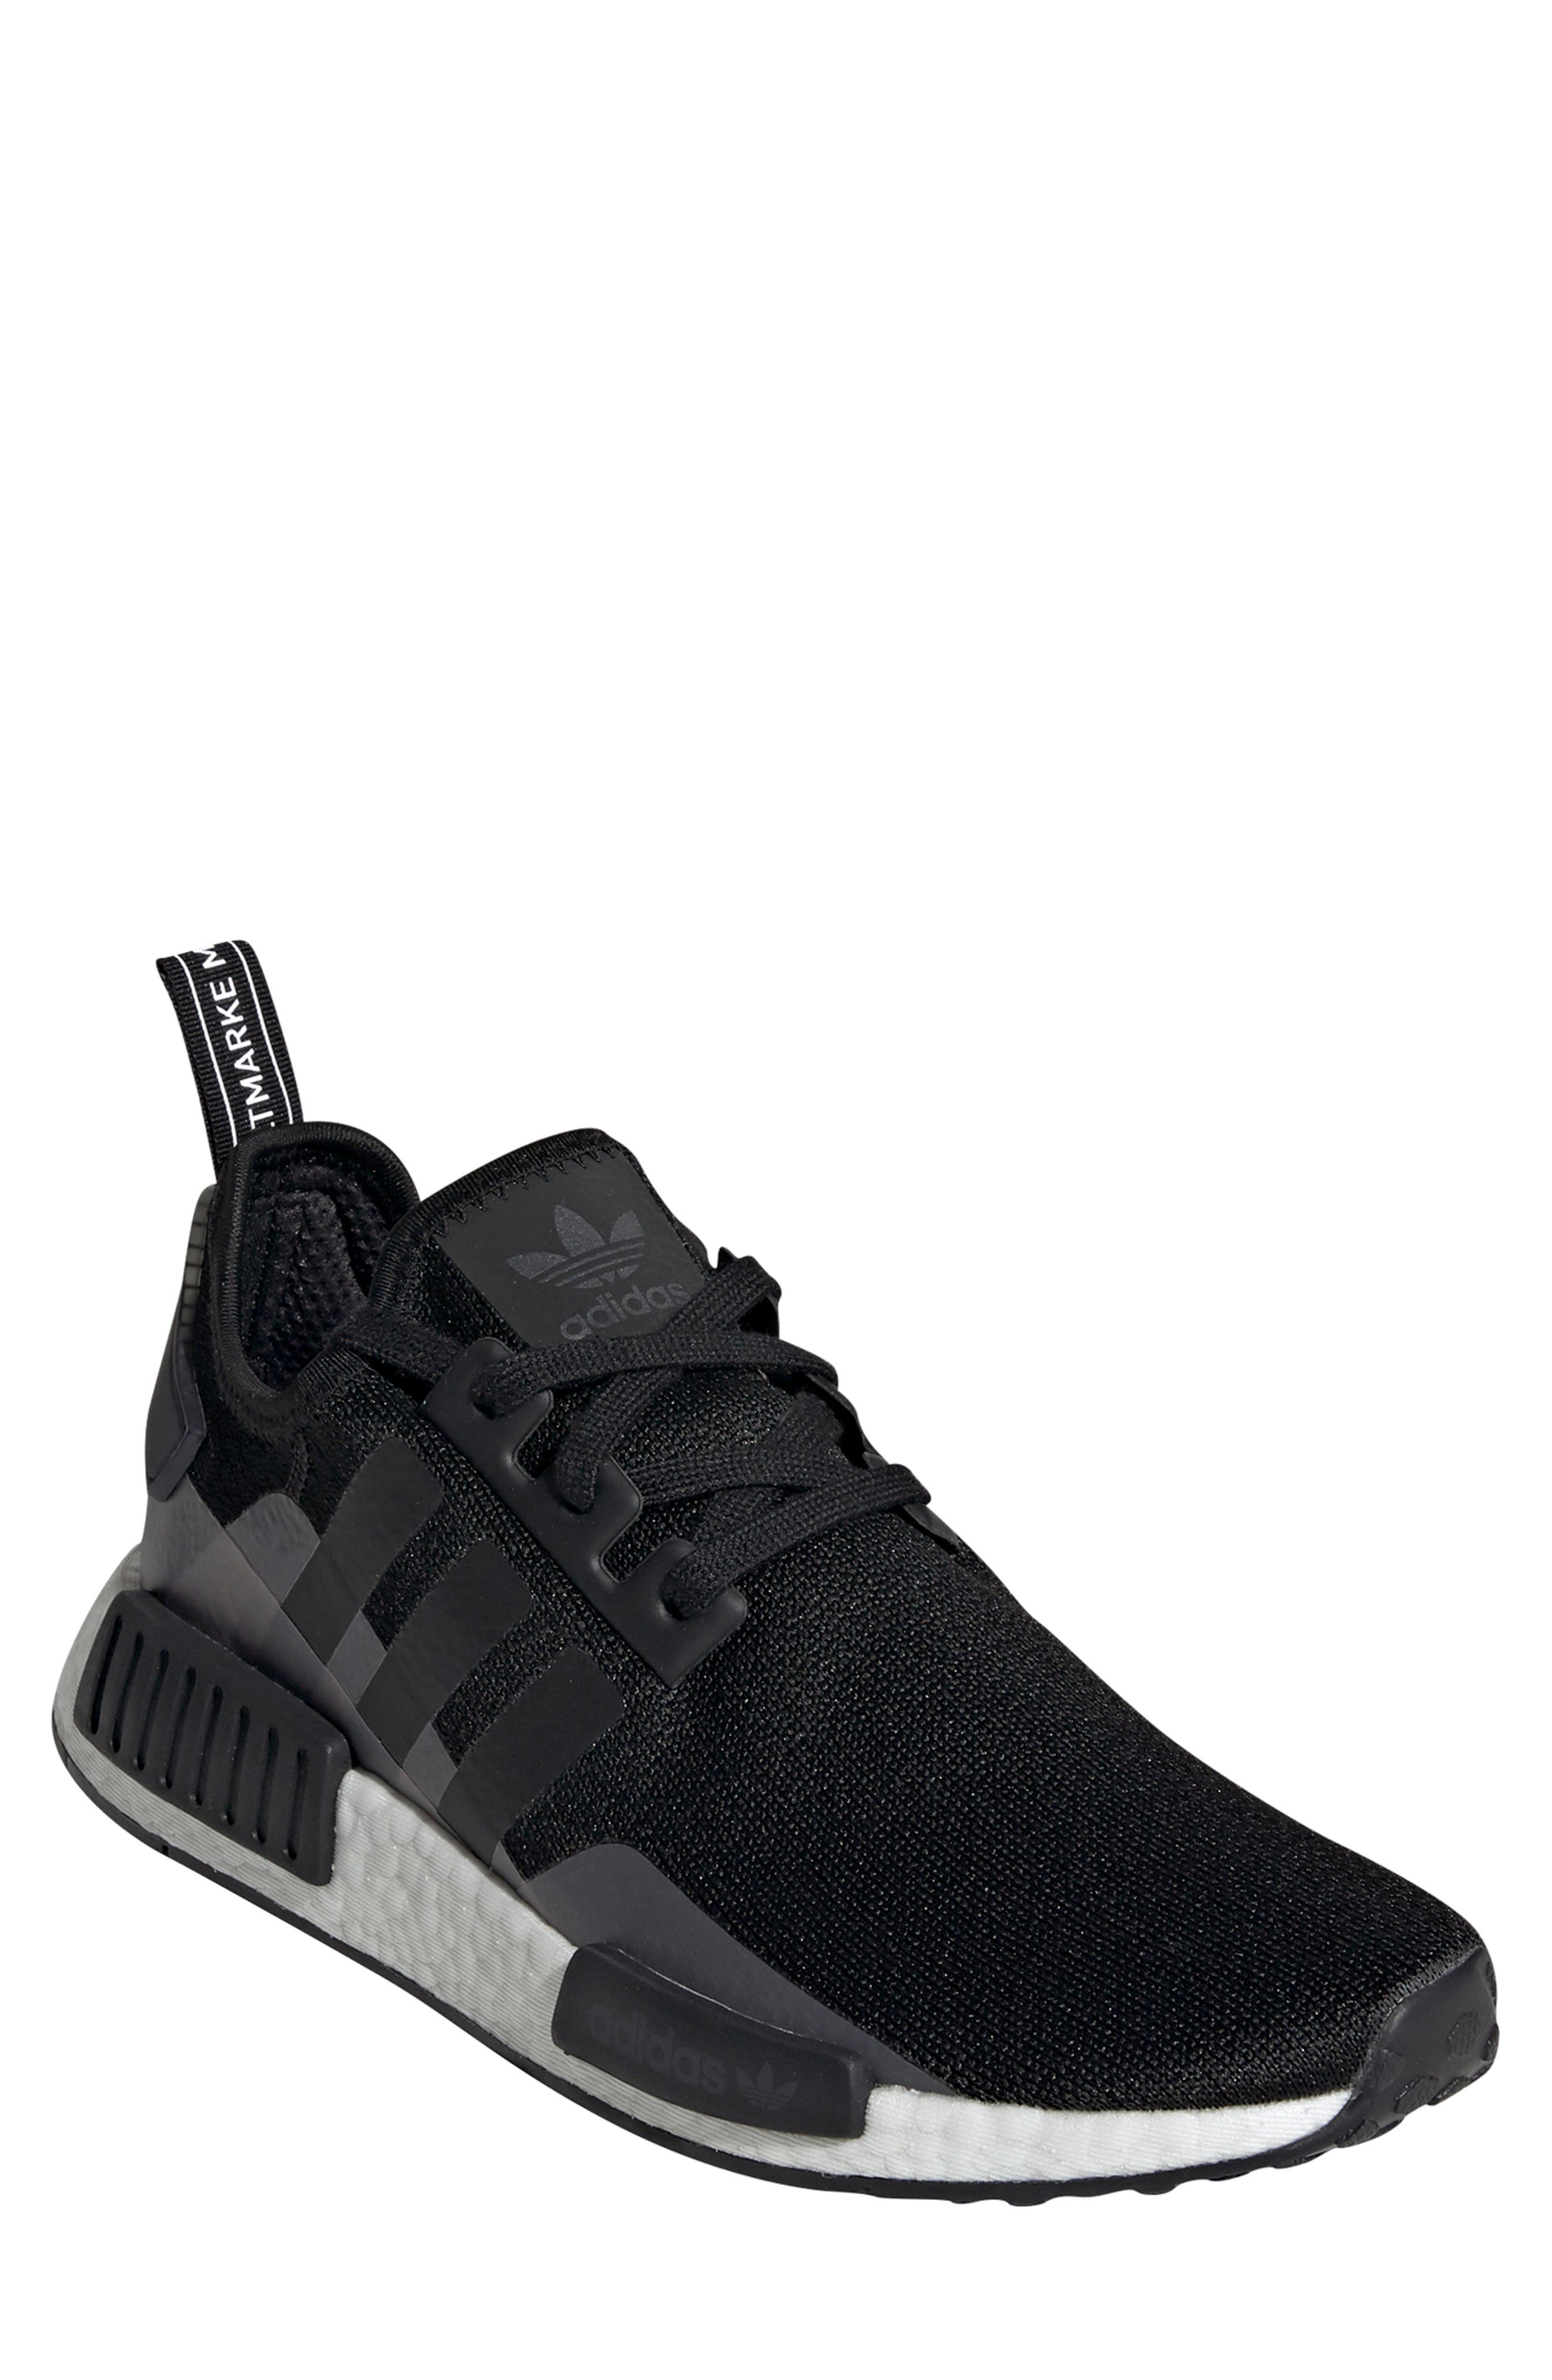 nordstrom nmd r1 womens